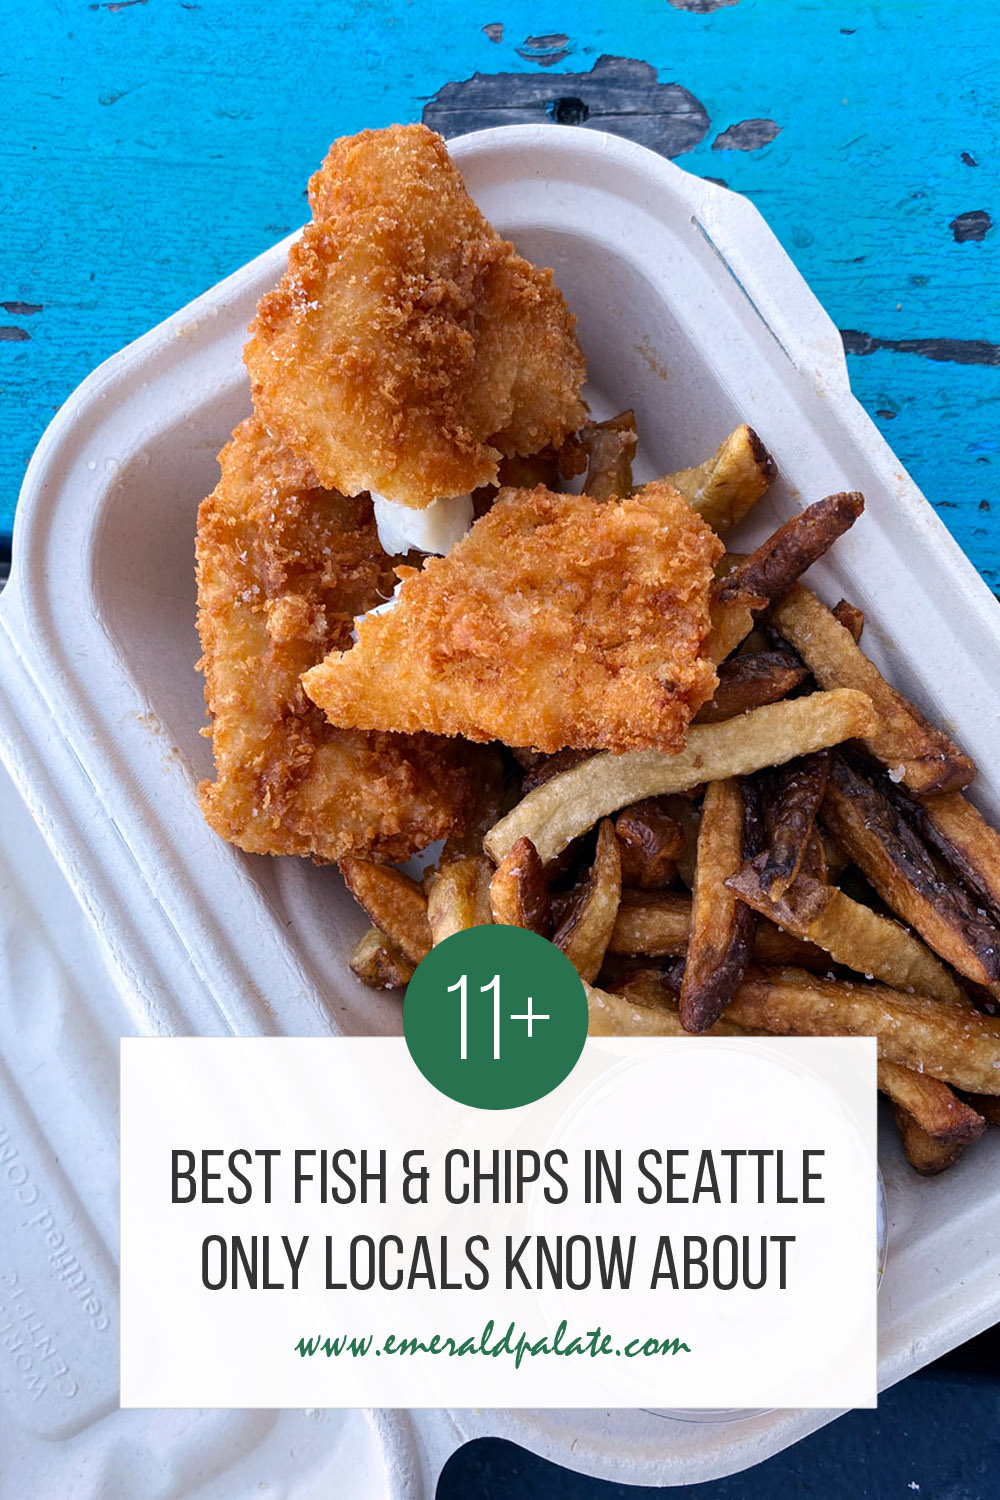 Where to get the best fish and chips in Seattle. From breaded fish and chips to beer battered fish and chips, here are Seattle fish and chip spots worth seeking out if you love fried food.